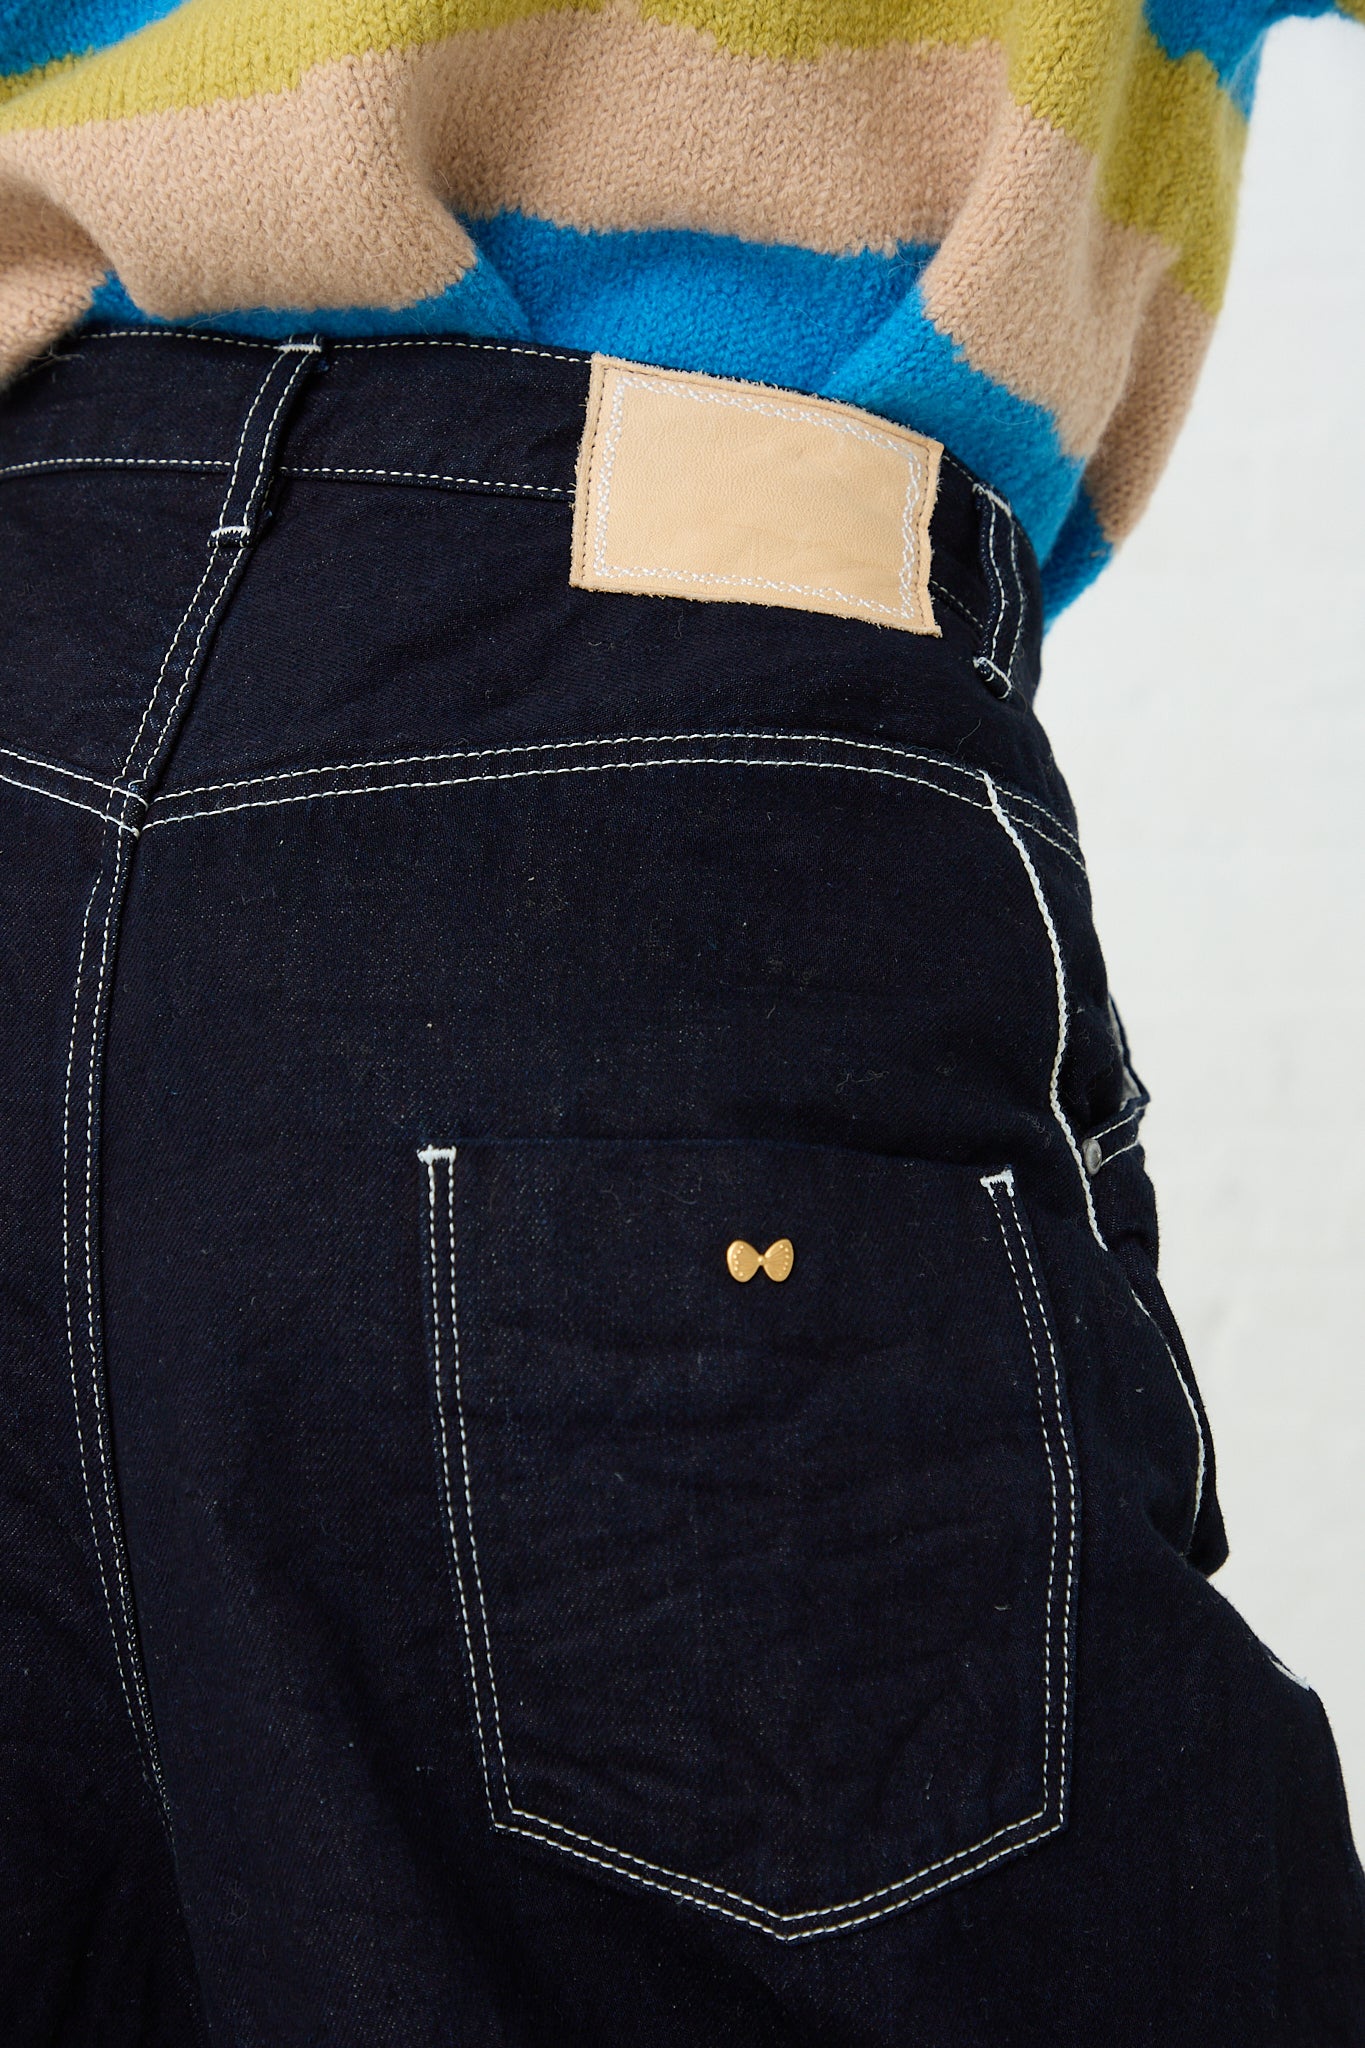 The back pocket of a person's Mina Perhonen Always Balloon Wide Pant in Indigo denim jeans. Up close view of pocket stitching and details.